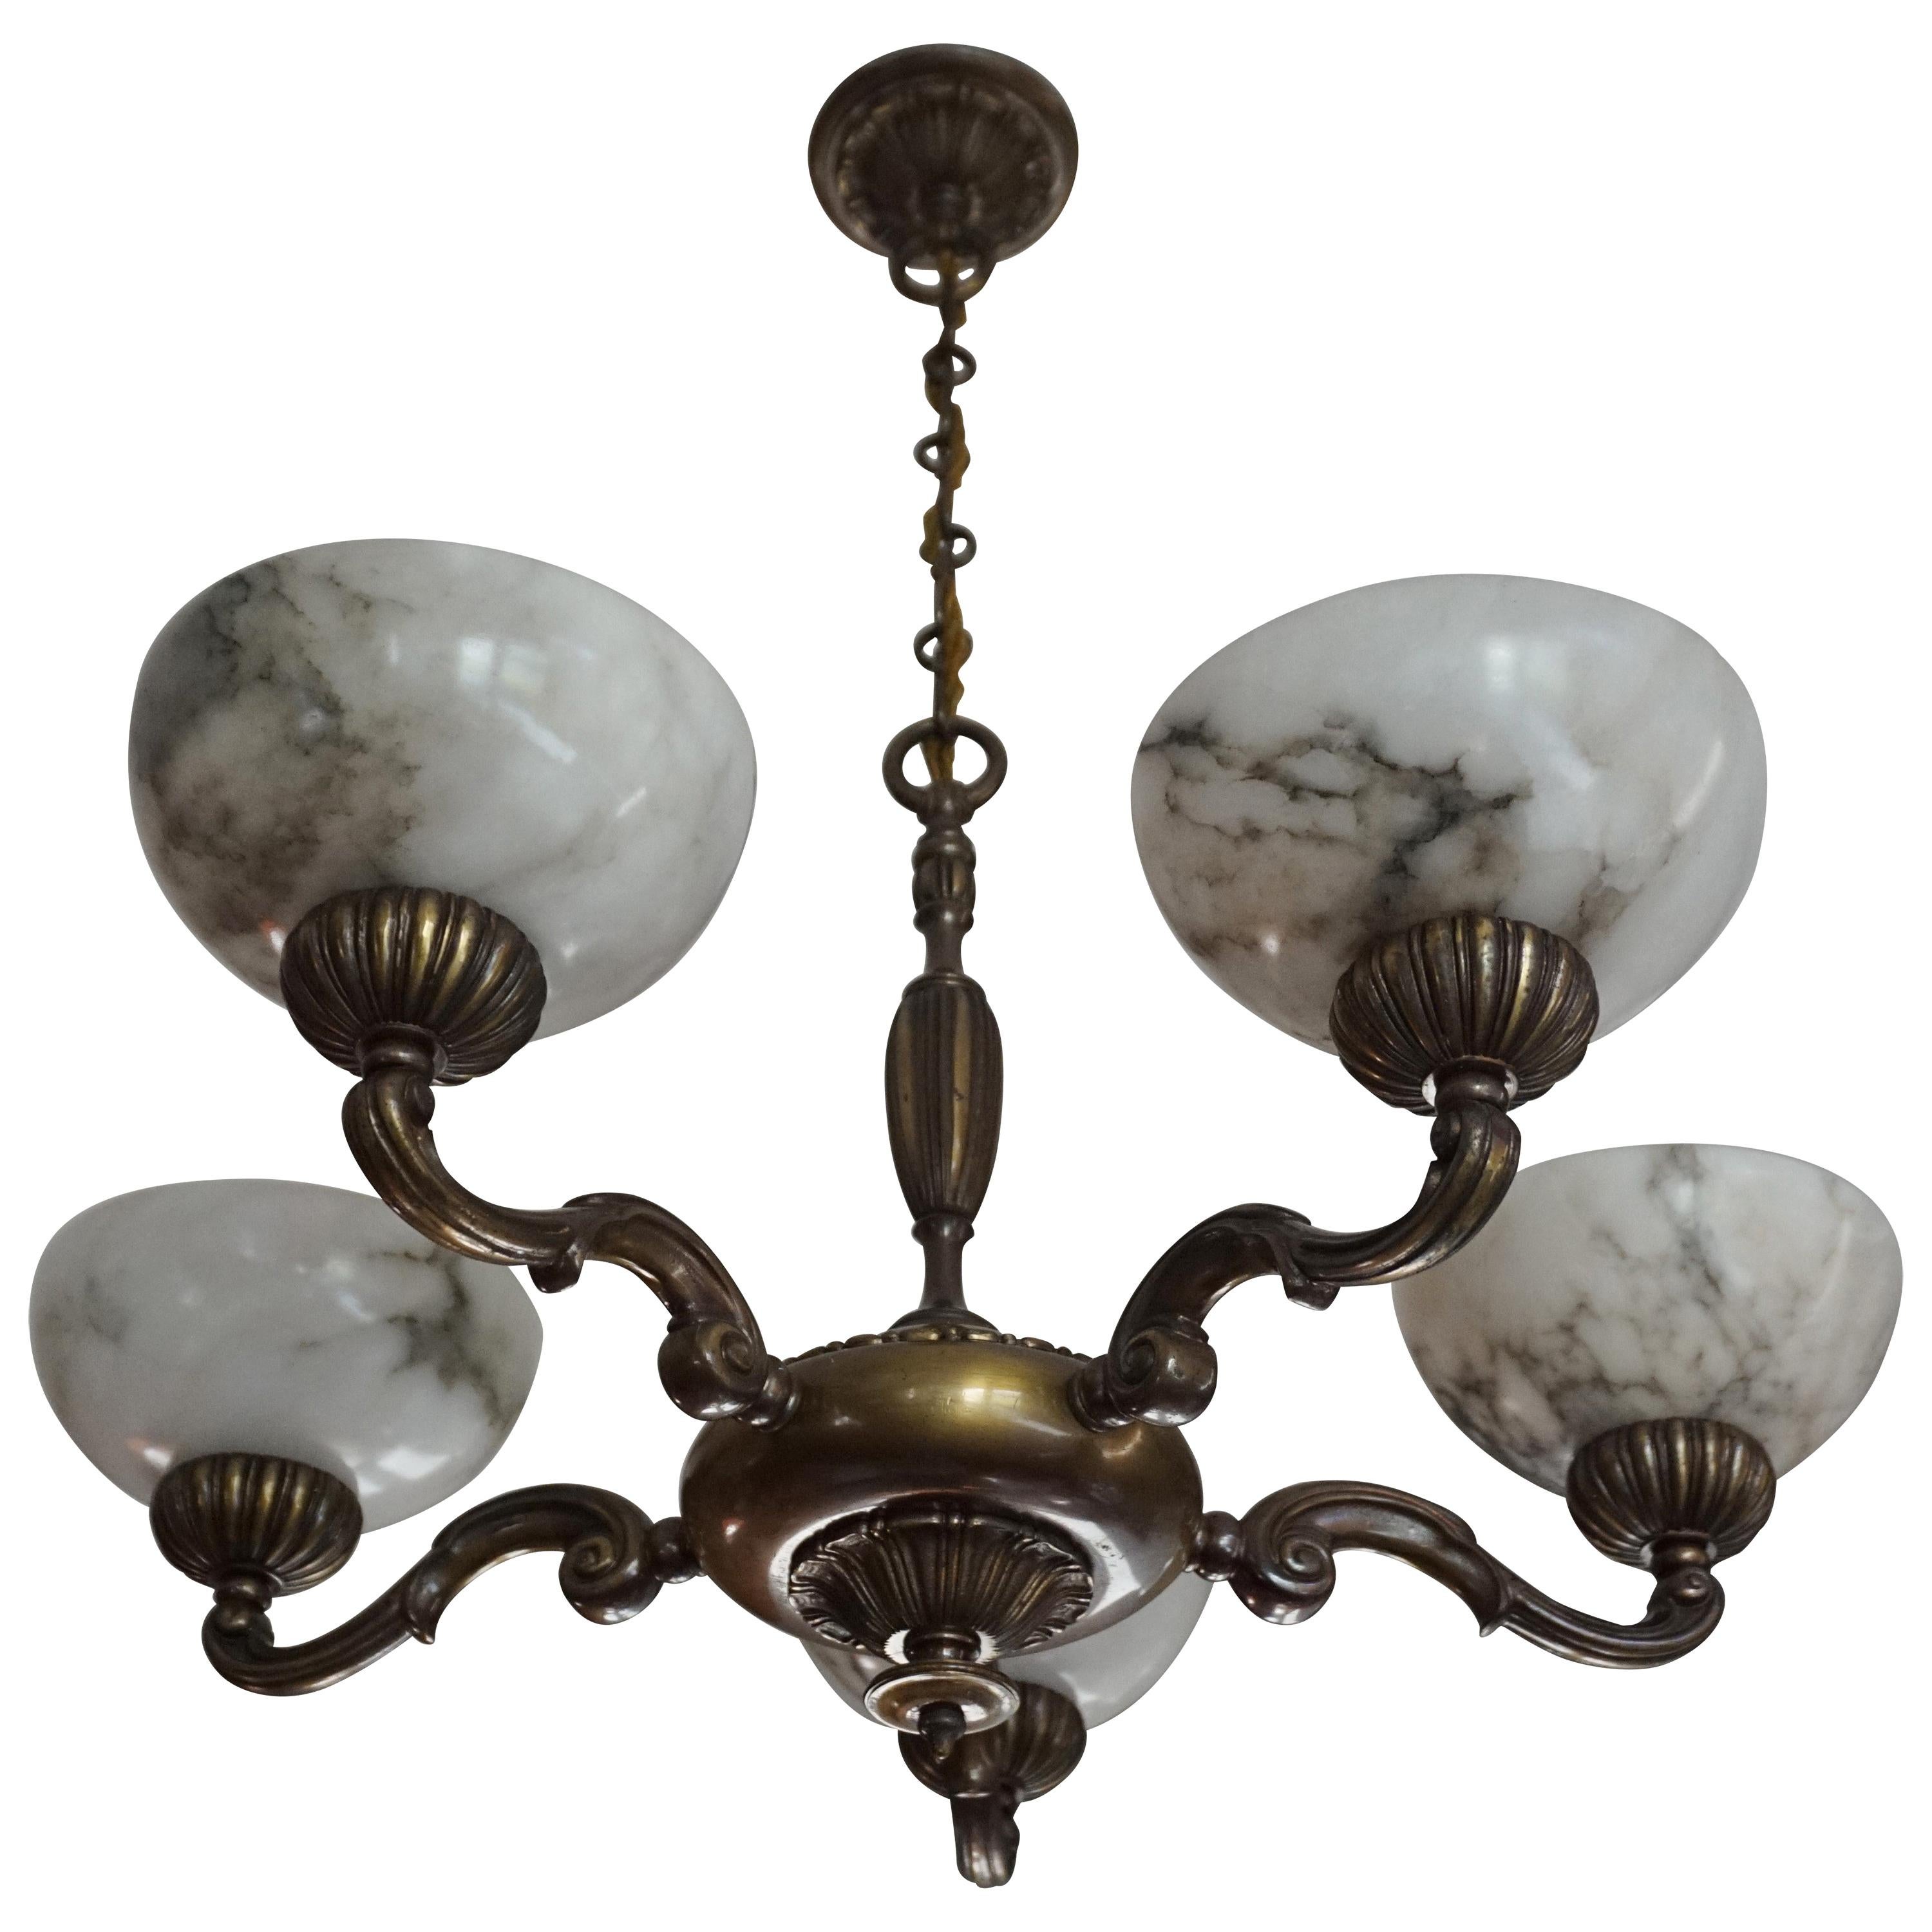 Beautiful Looking Classical Style Brass and Alabaster Chandelier / Light Fixture